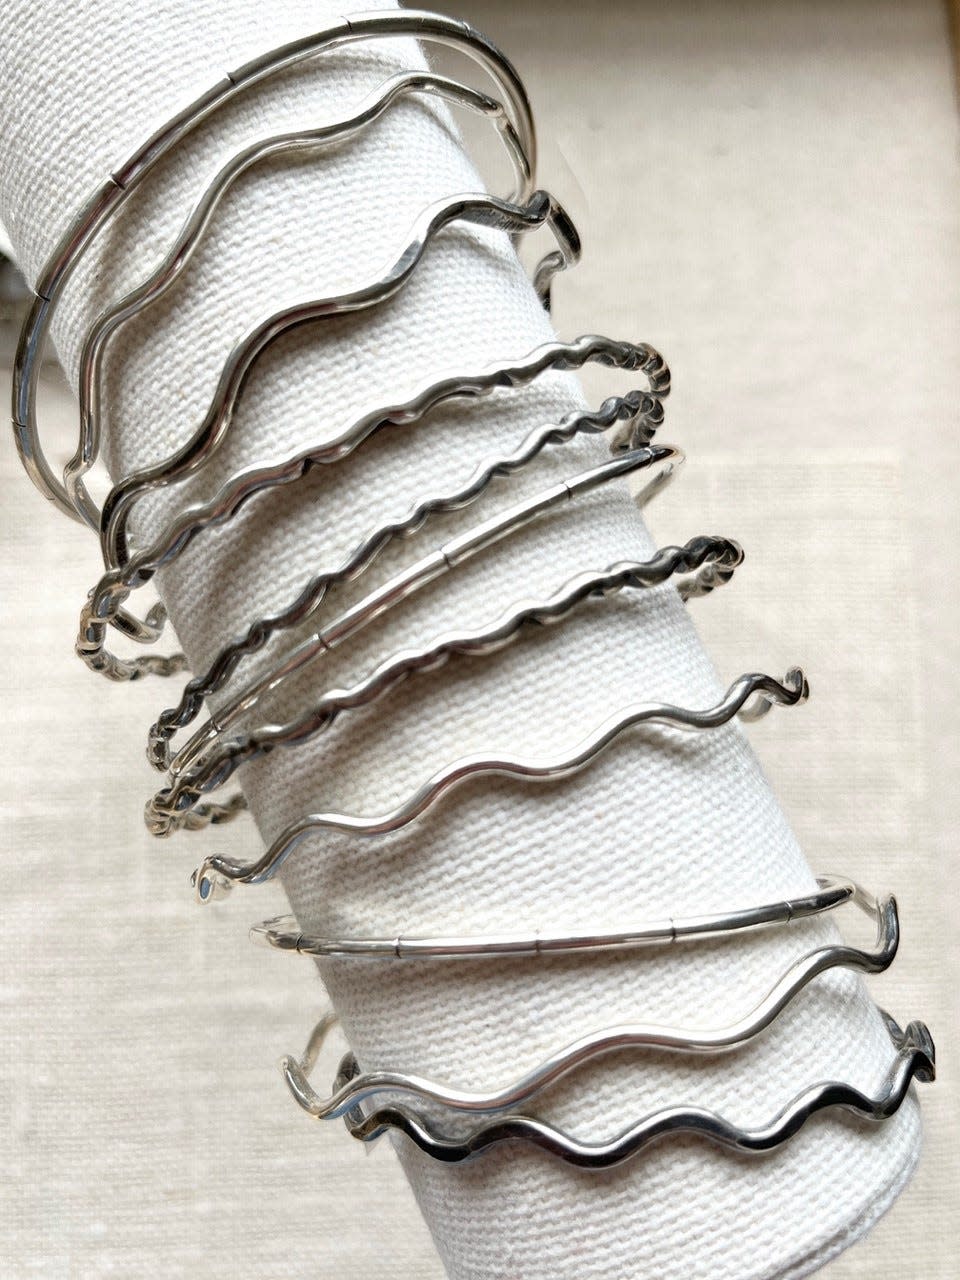 Wave bangles by Falmouth silversmith Laura Bouton.